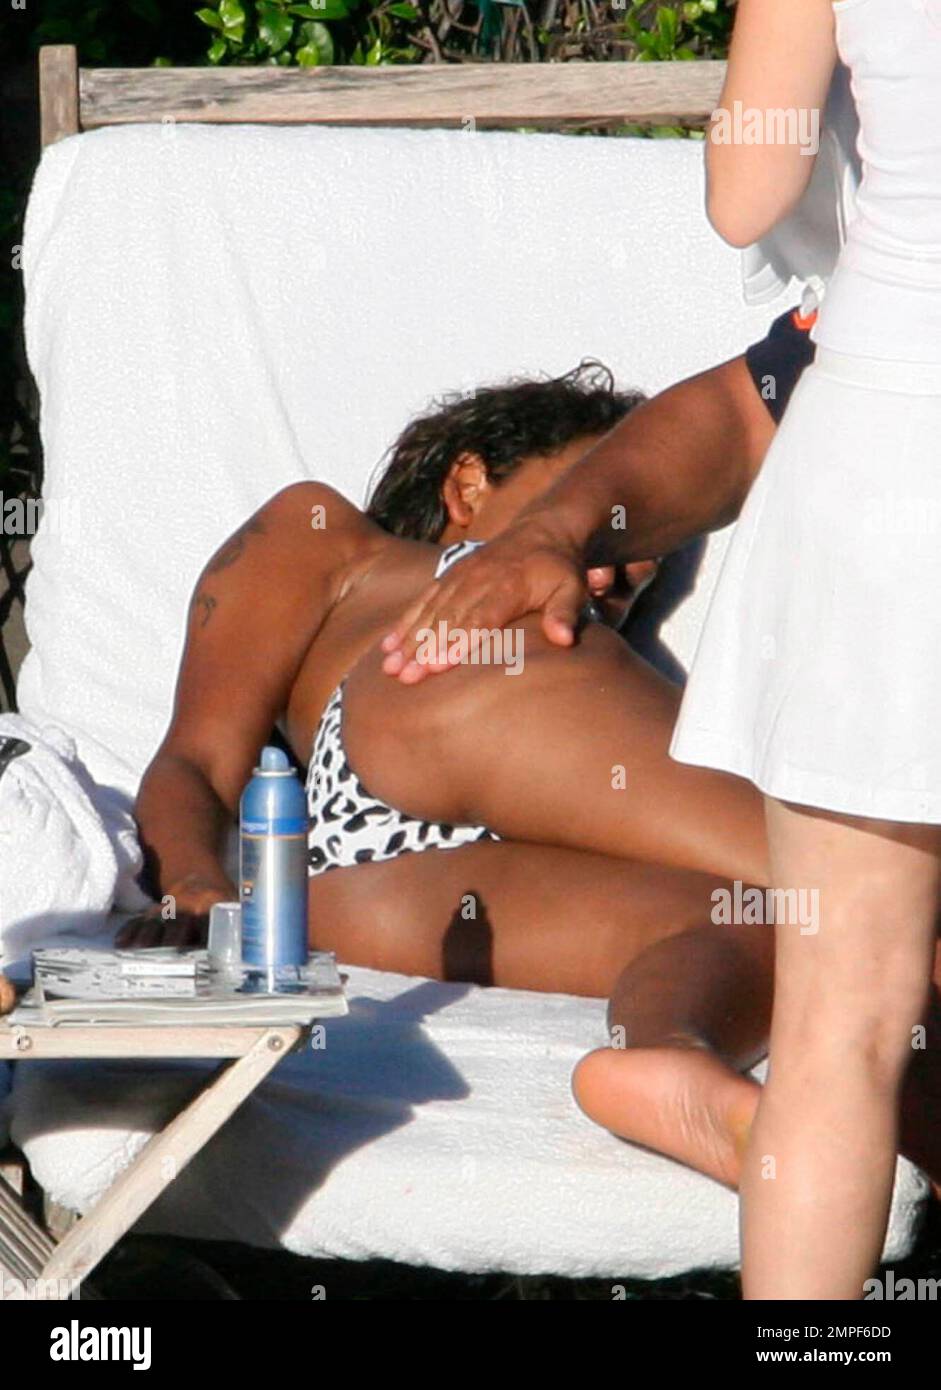 Exclusive!! Scary Spice Mel B enjoys a very boozy lunch lounging poolside at her exclusive Miami Beach hotel pic photo photo